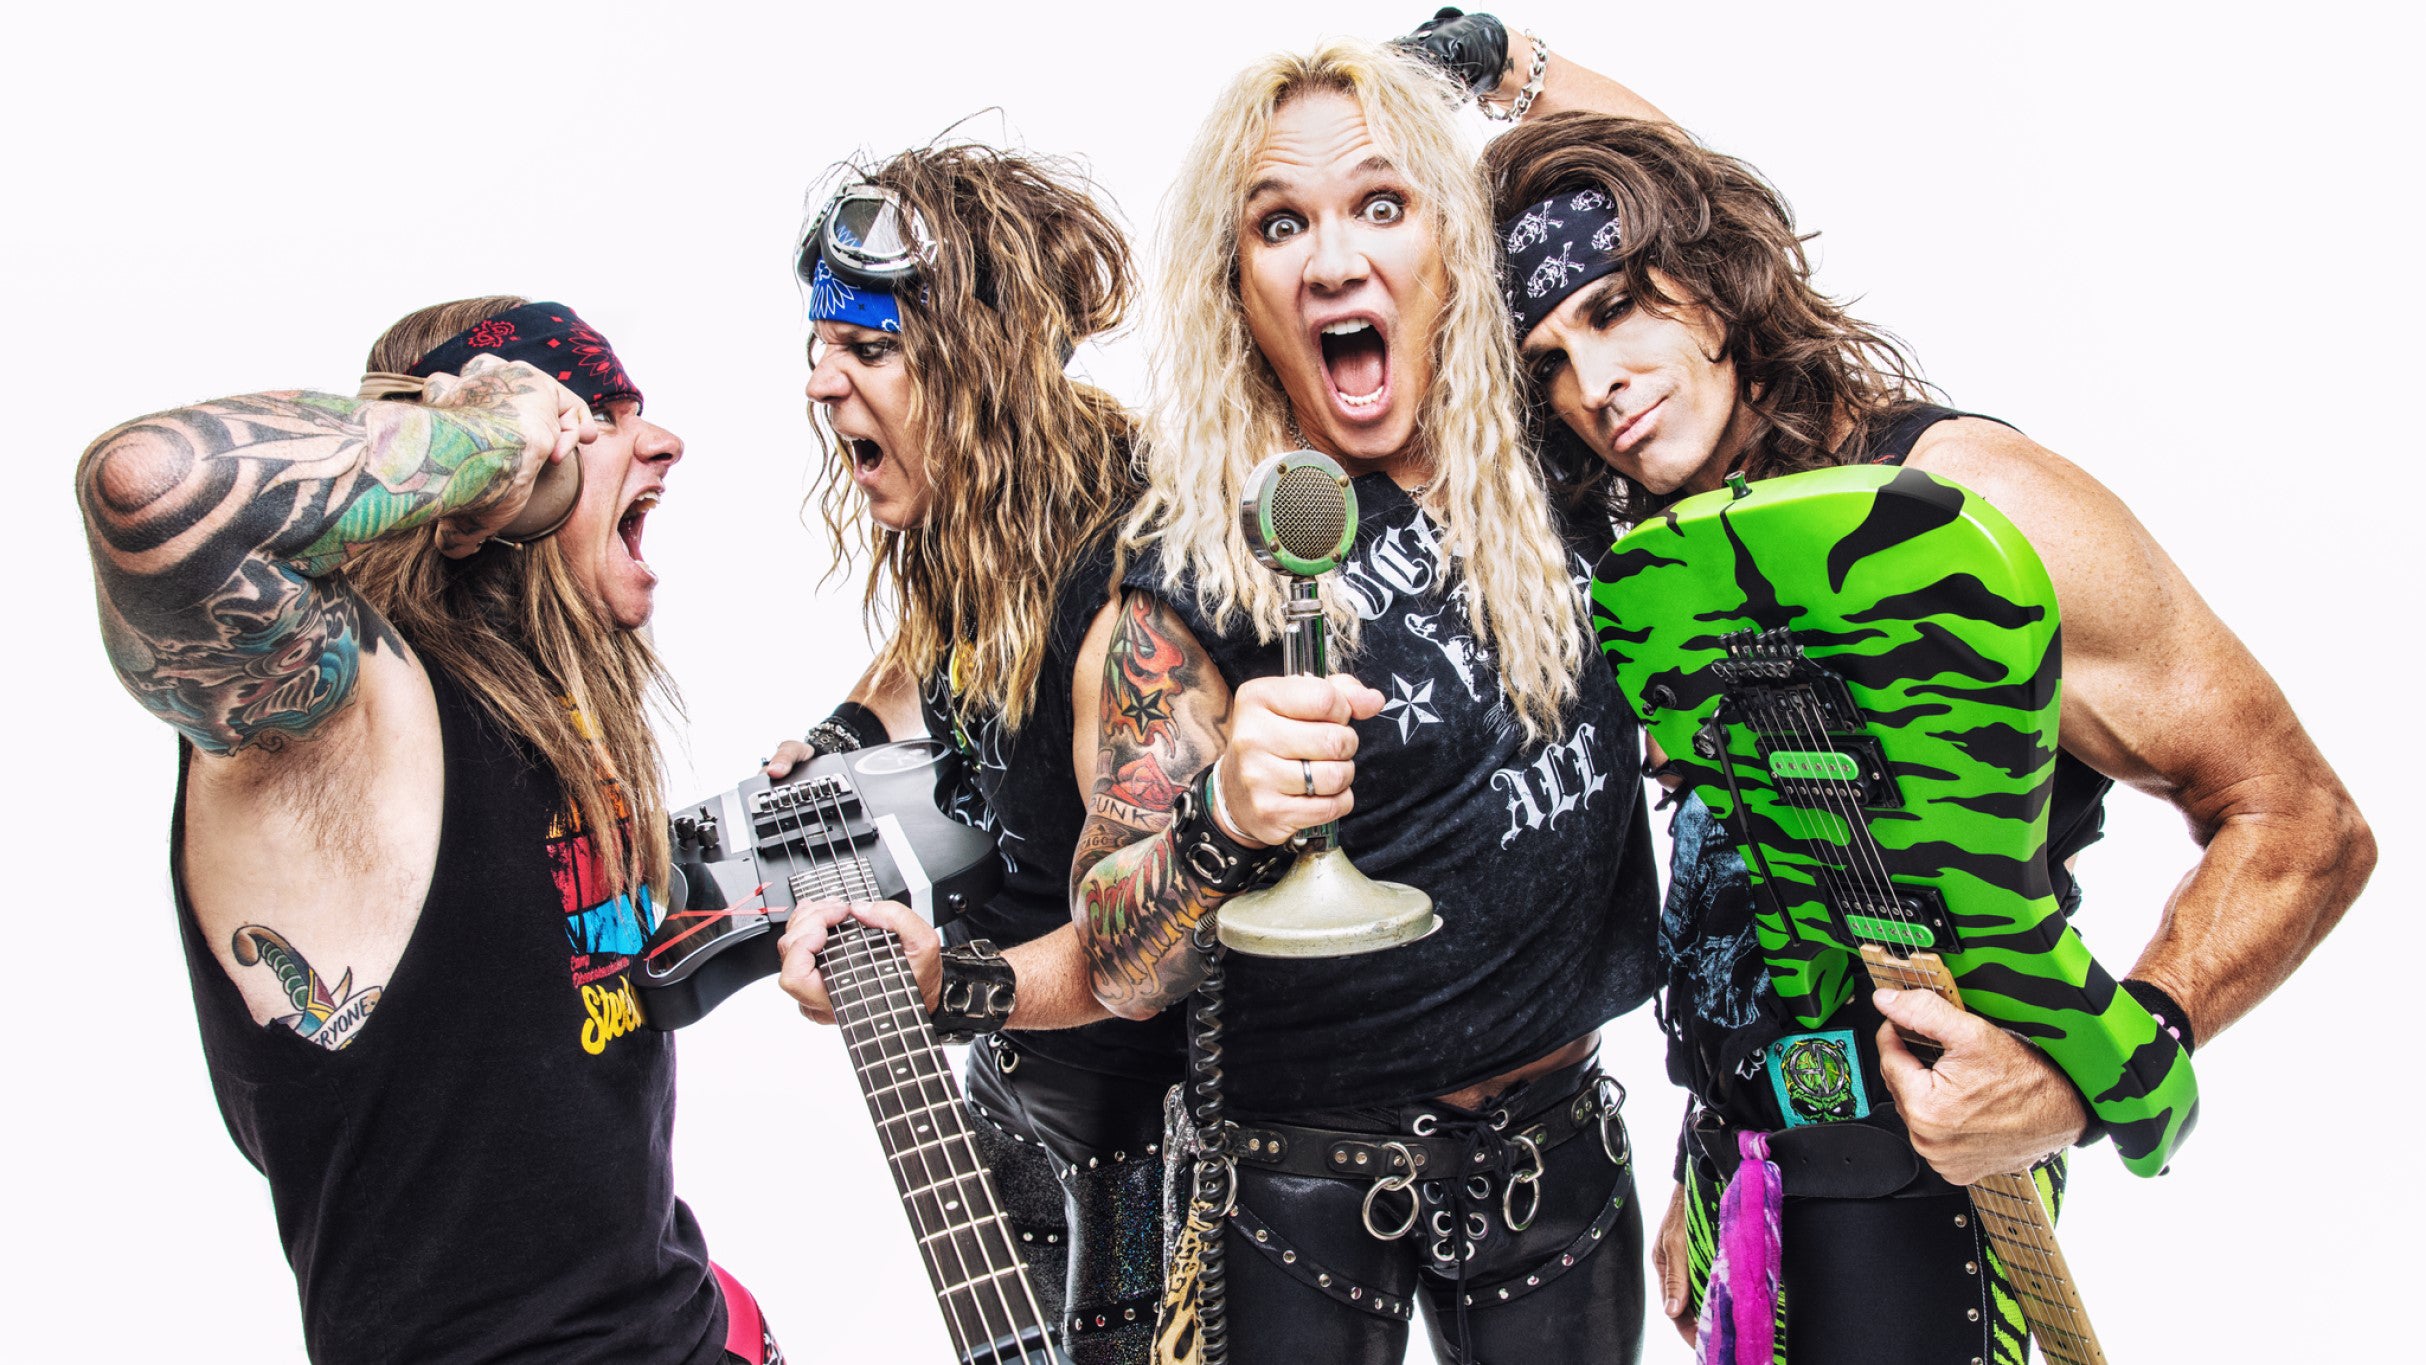 Steel Panther - On The Prowl World Tour in New Orleans promo photo for Rakuten Summer's Live 4 Pack presale offer code